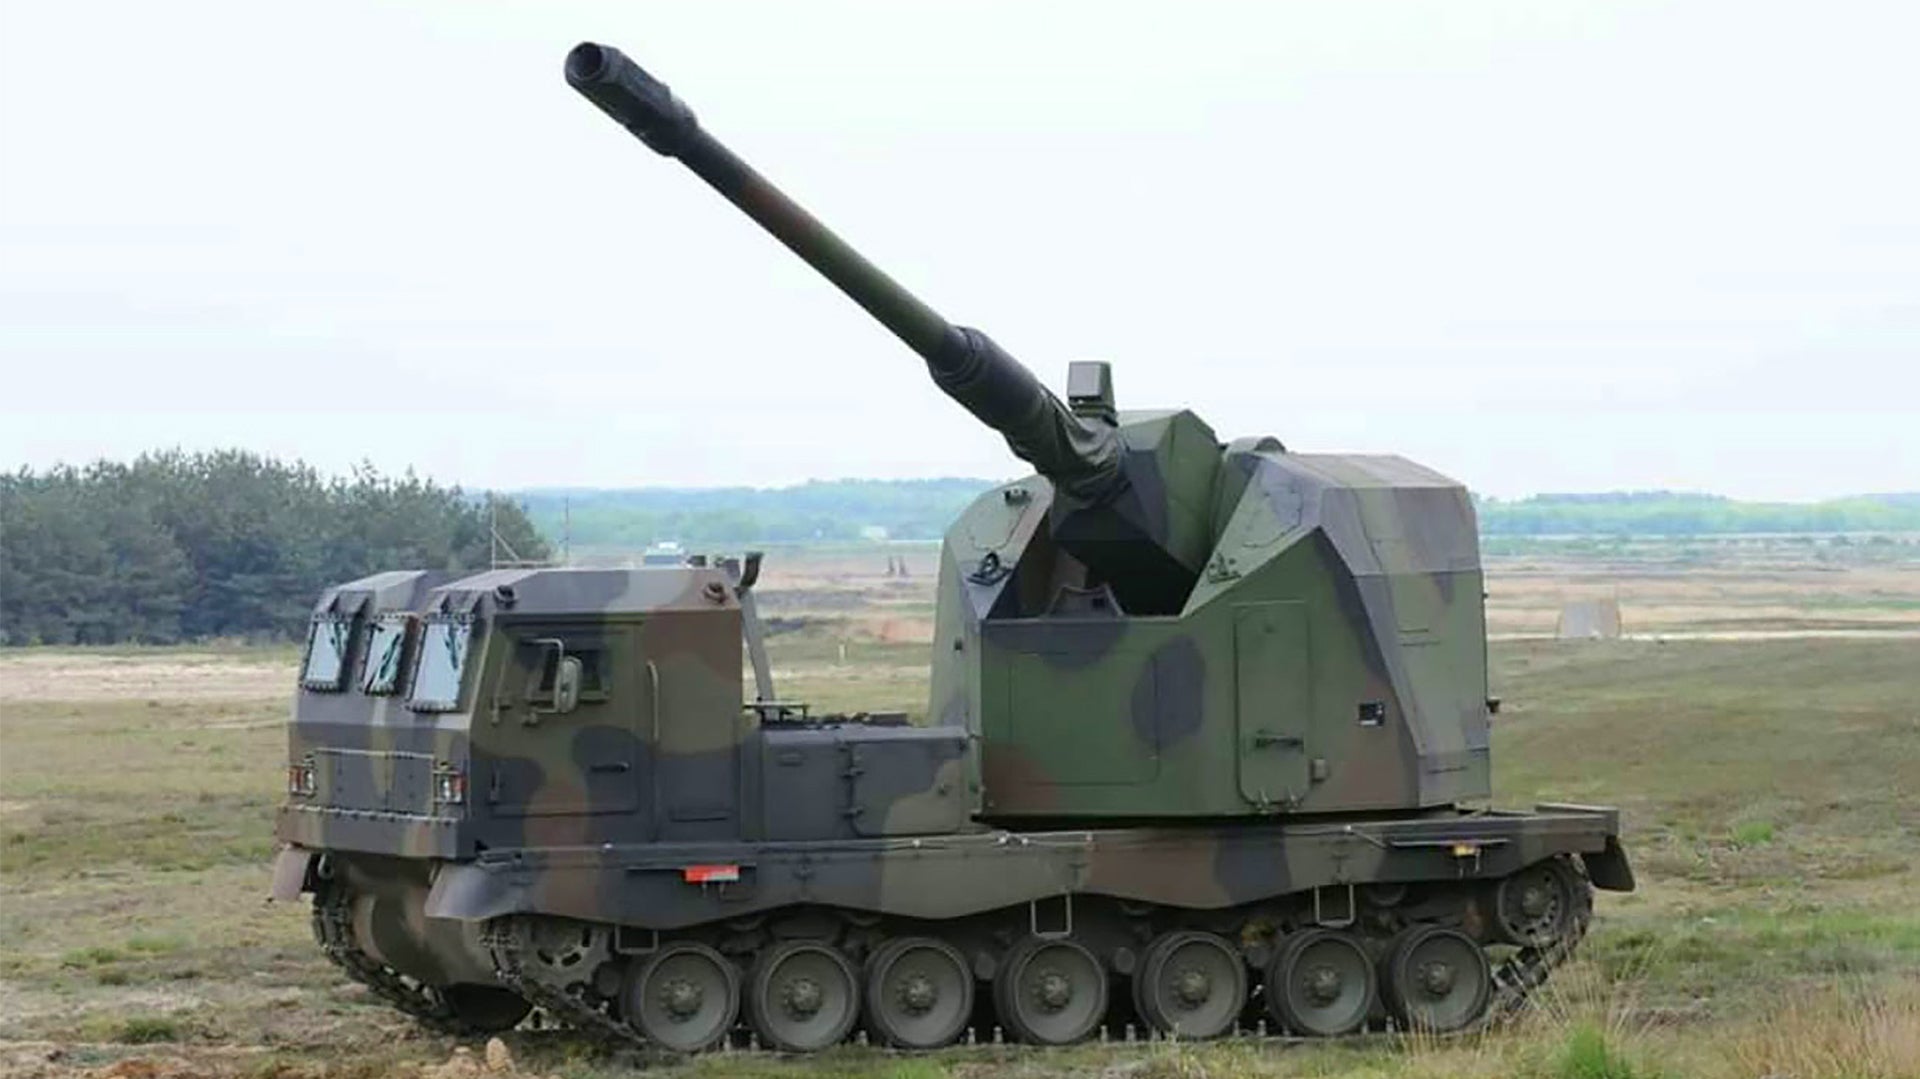 It Looks Meant For A Ship But This Big Armored Turret Can Turn Trucks Into Heavy Artillery